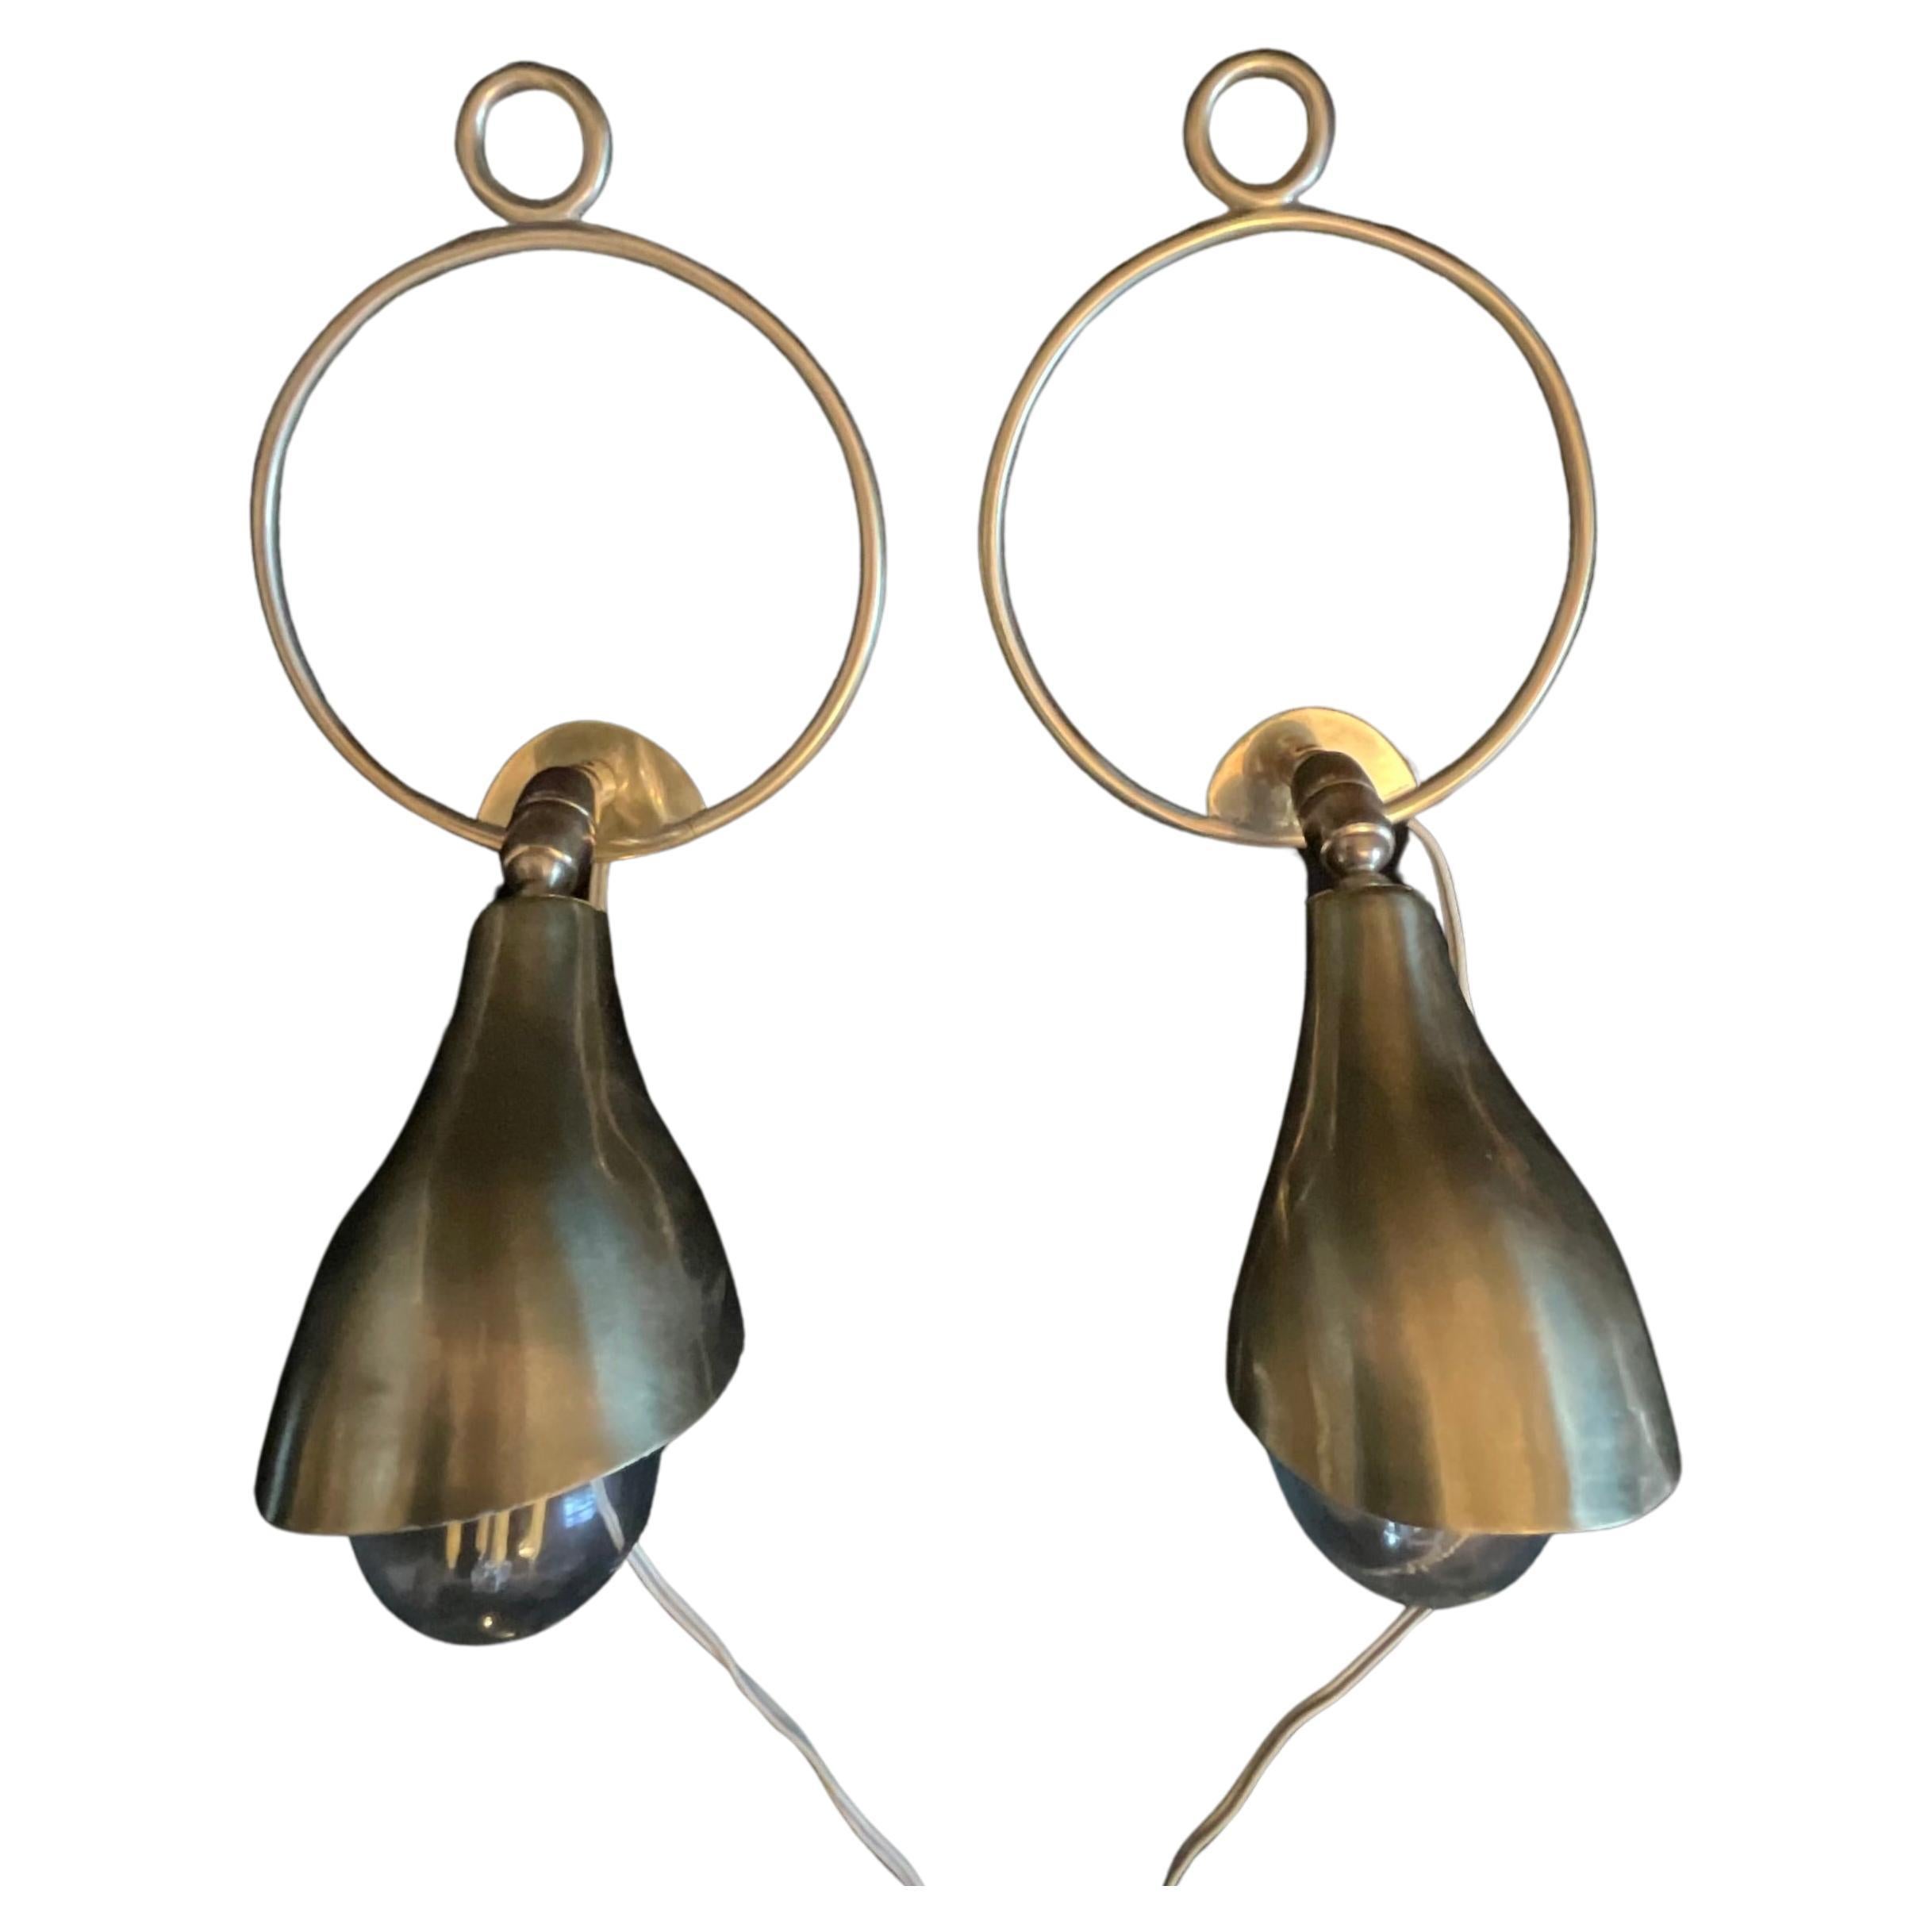 SARFATTI Gino - ARTELUCE -Pair of brass wall or floor sconces  For Sale